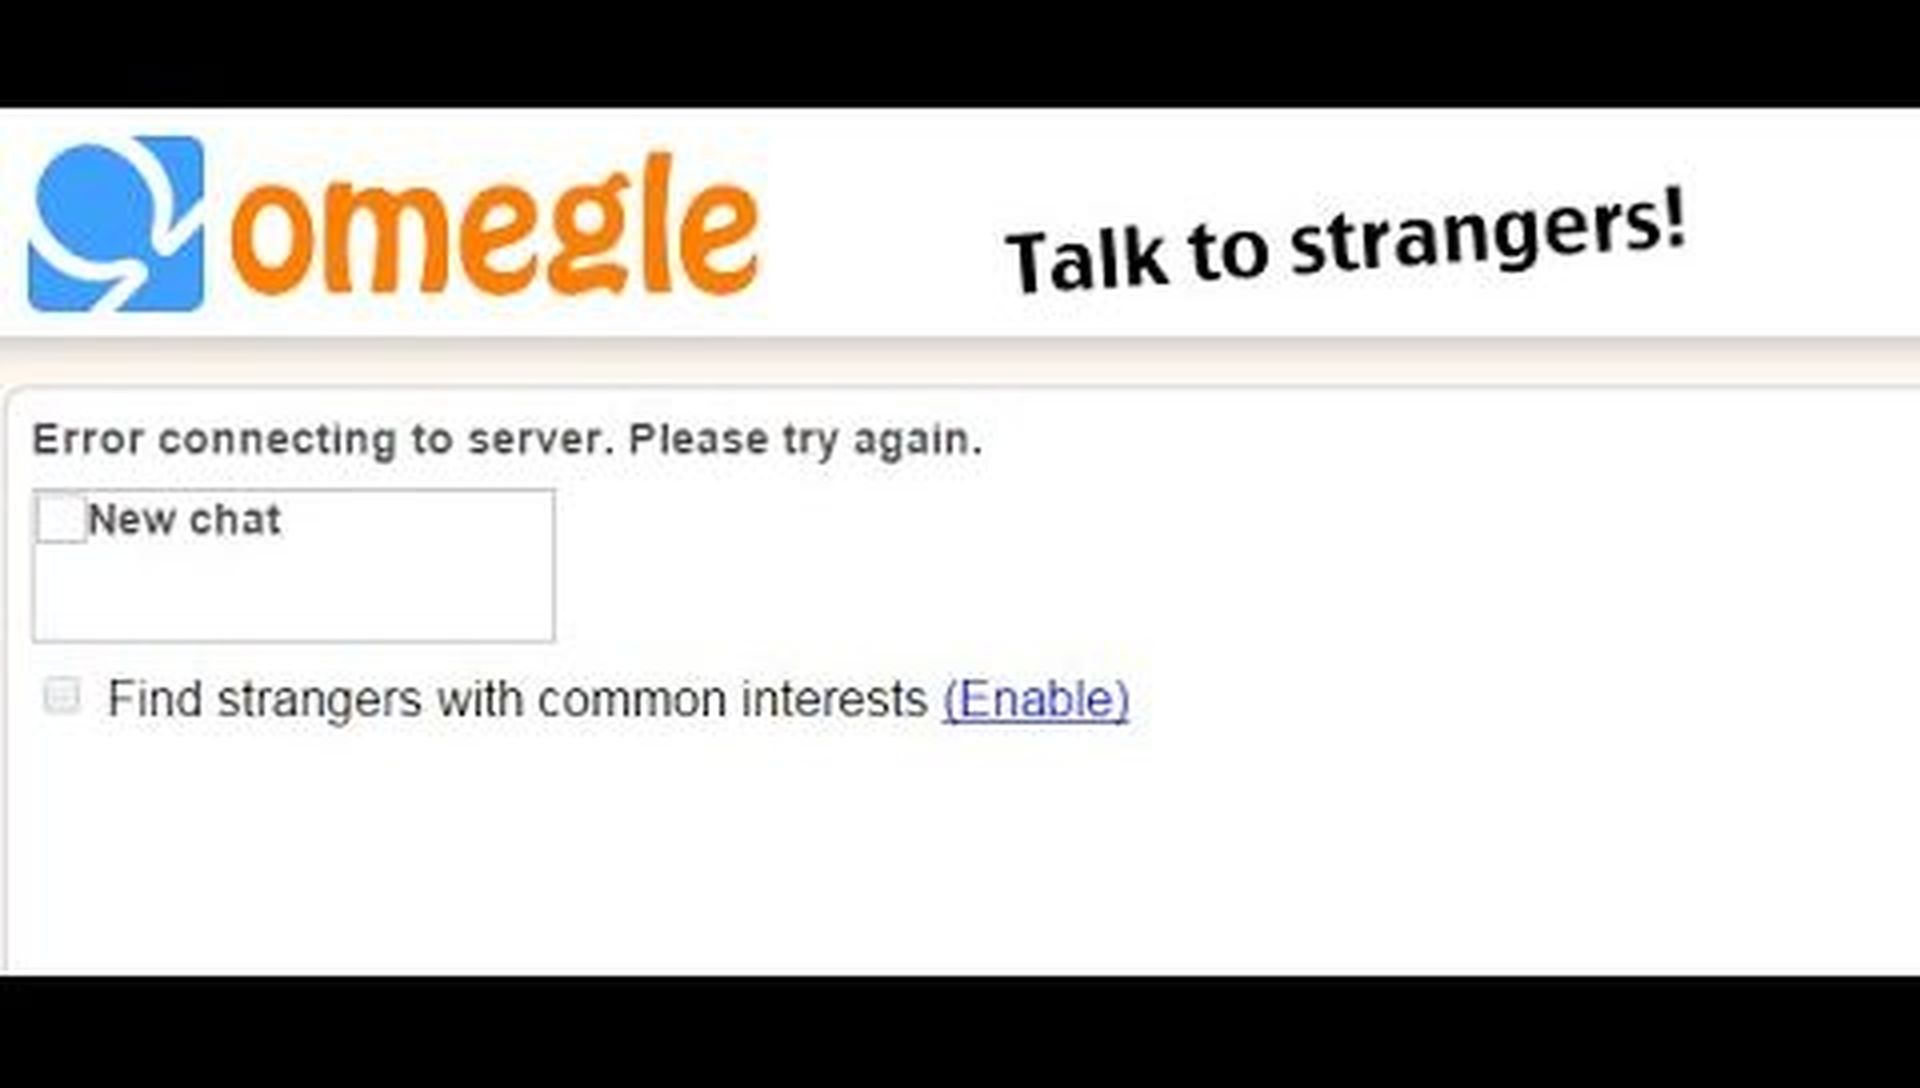 In this article, we are going to be covering how to fix Omegle error connecting to server, so you can use the popular site and keep chatting with new people.